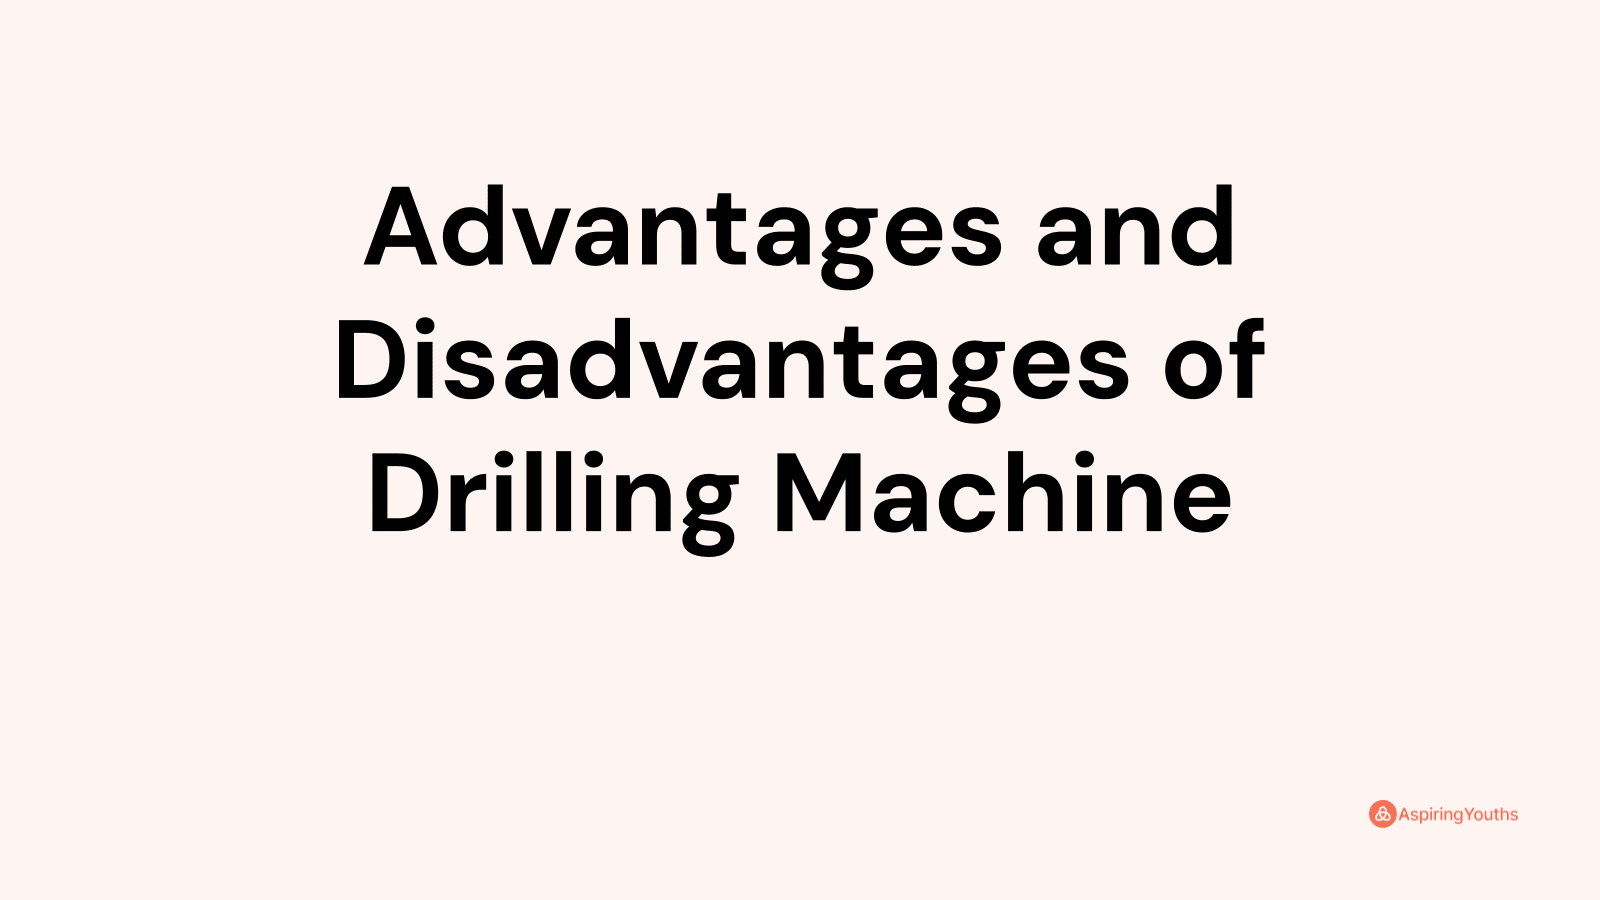 Advantages and disadvantages of Drilling Machine